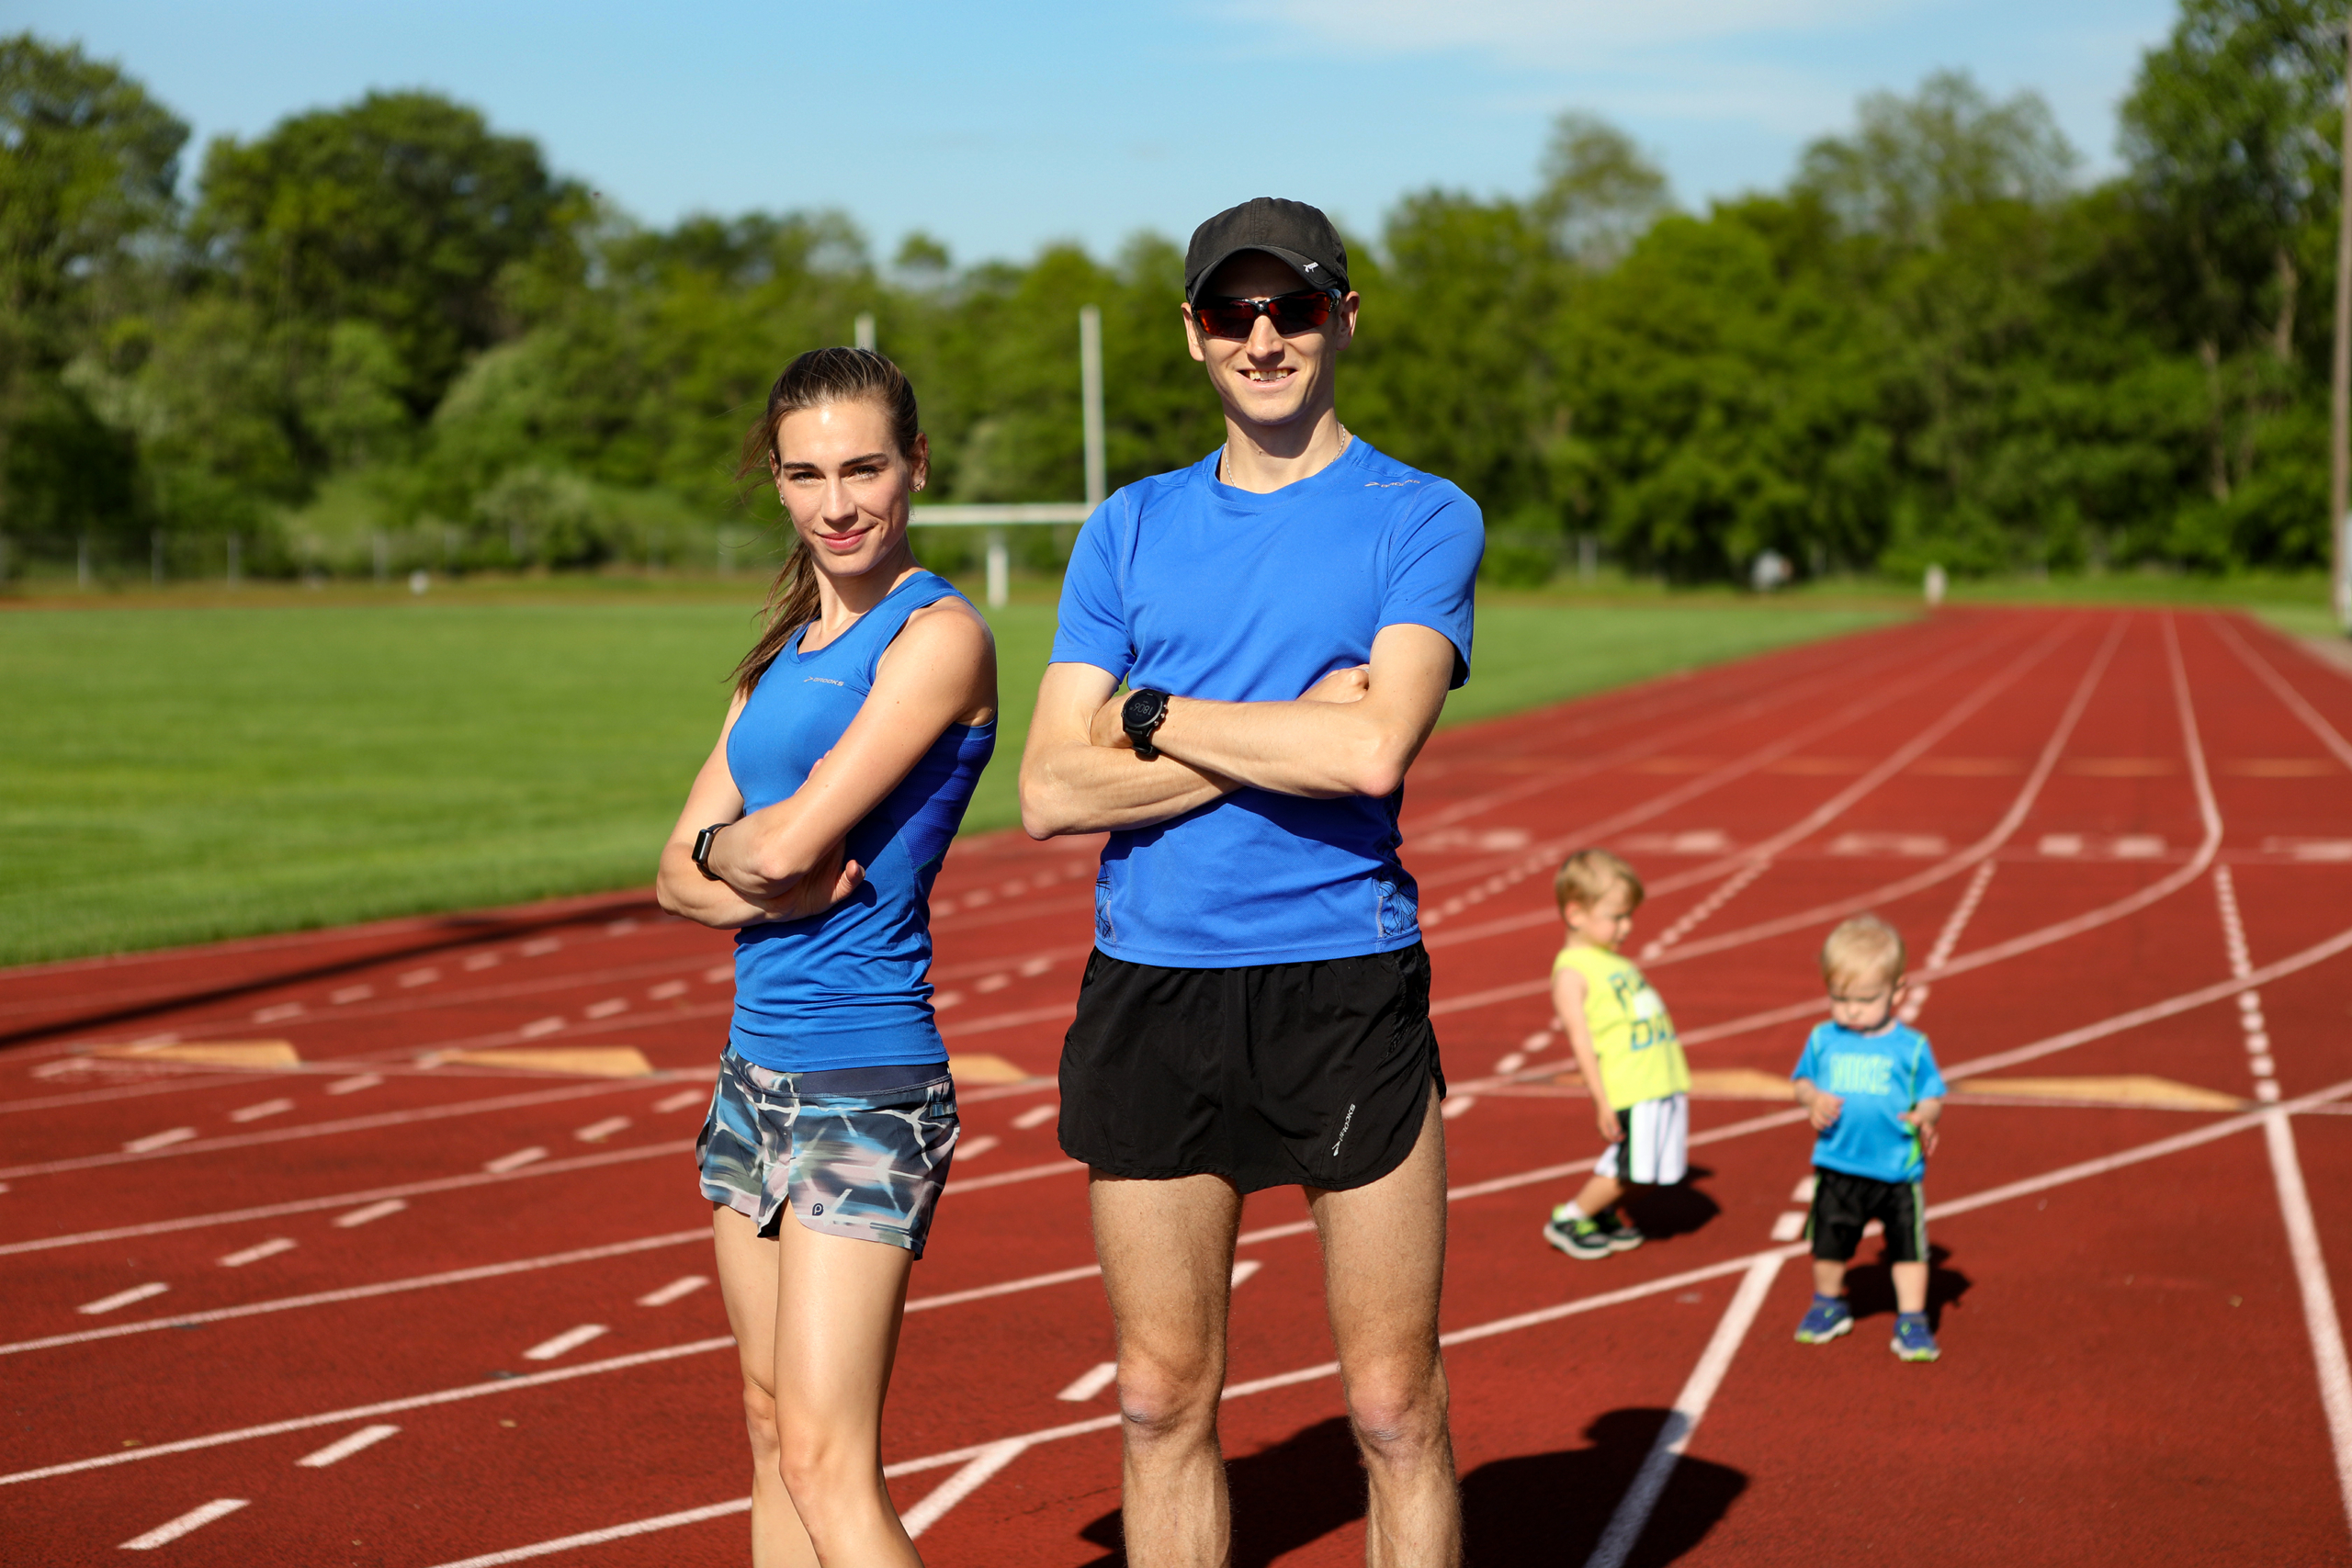 Family track workout